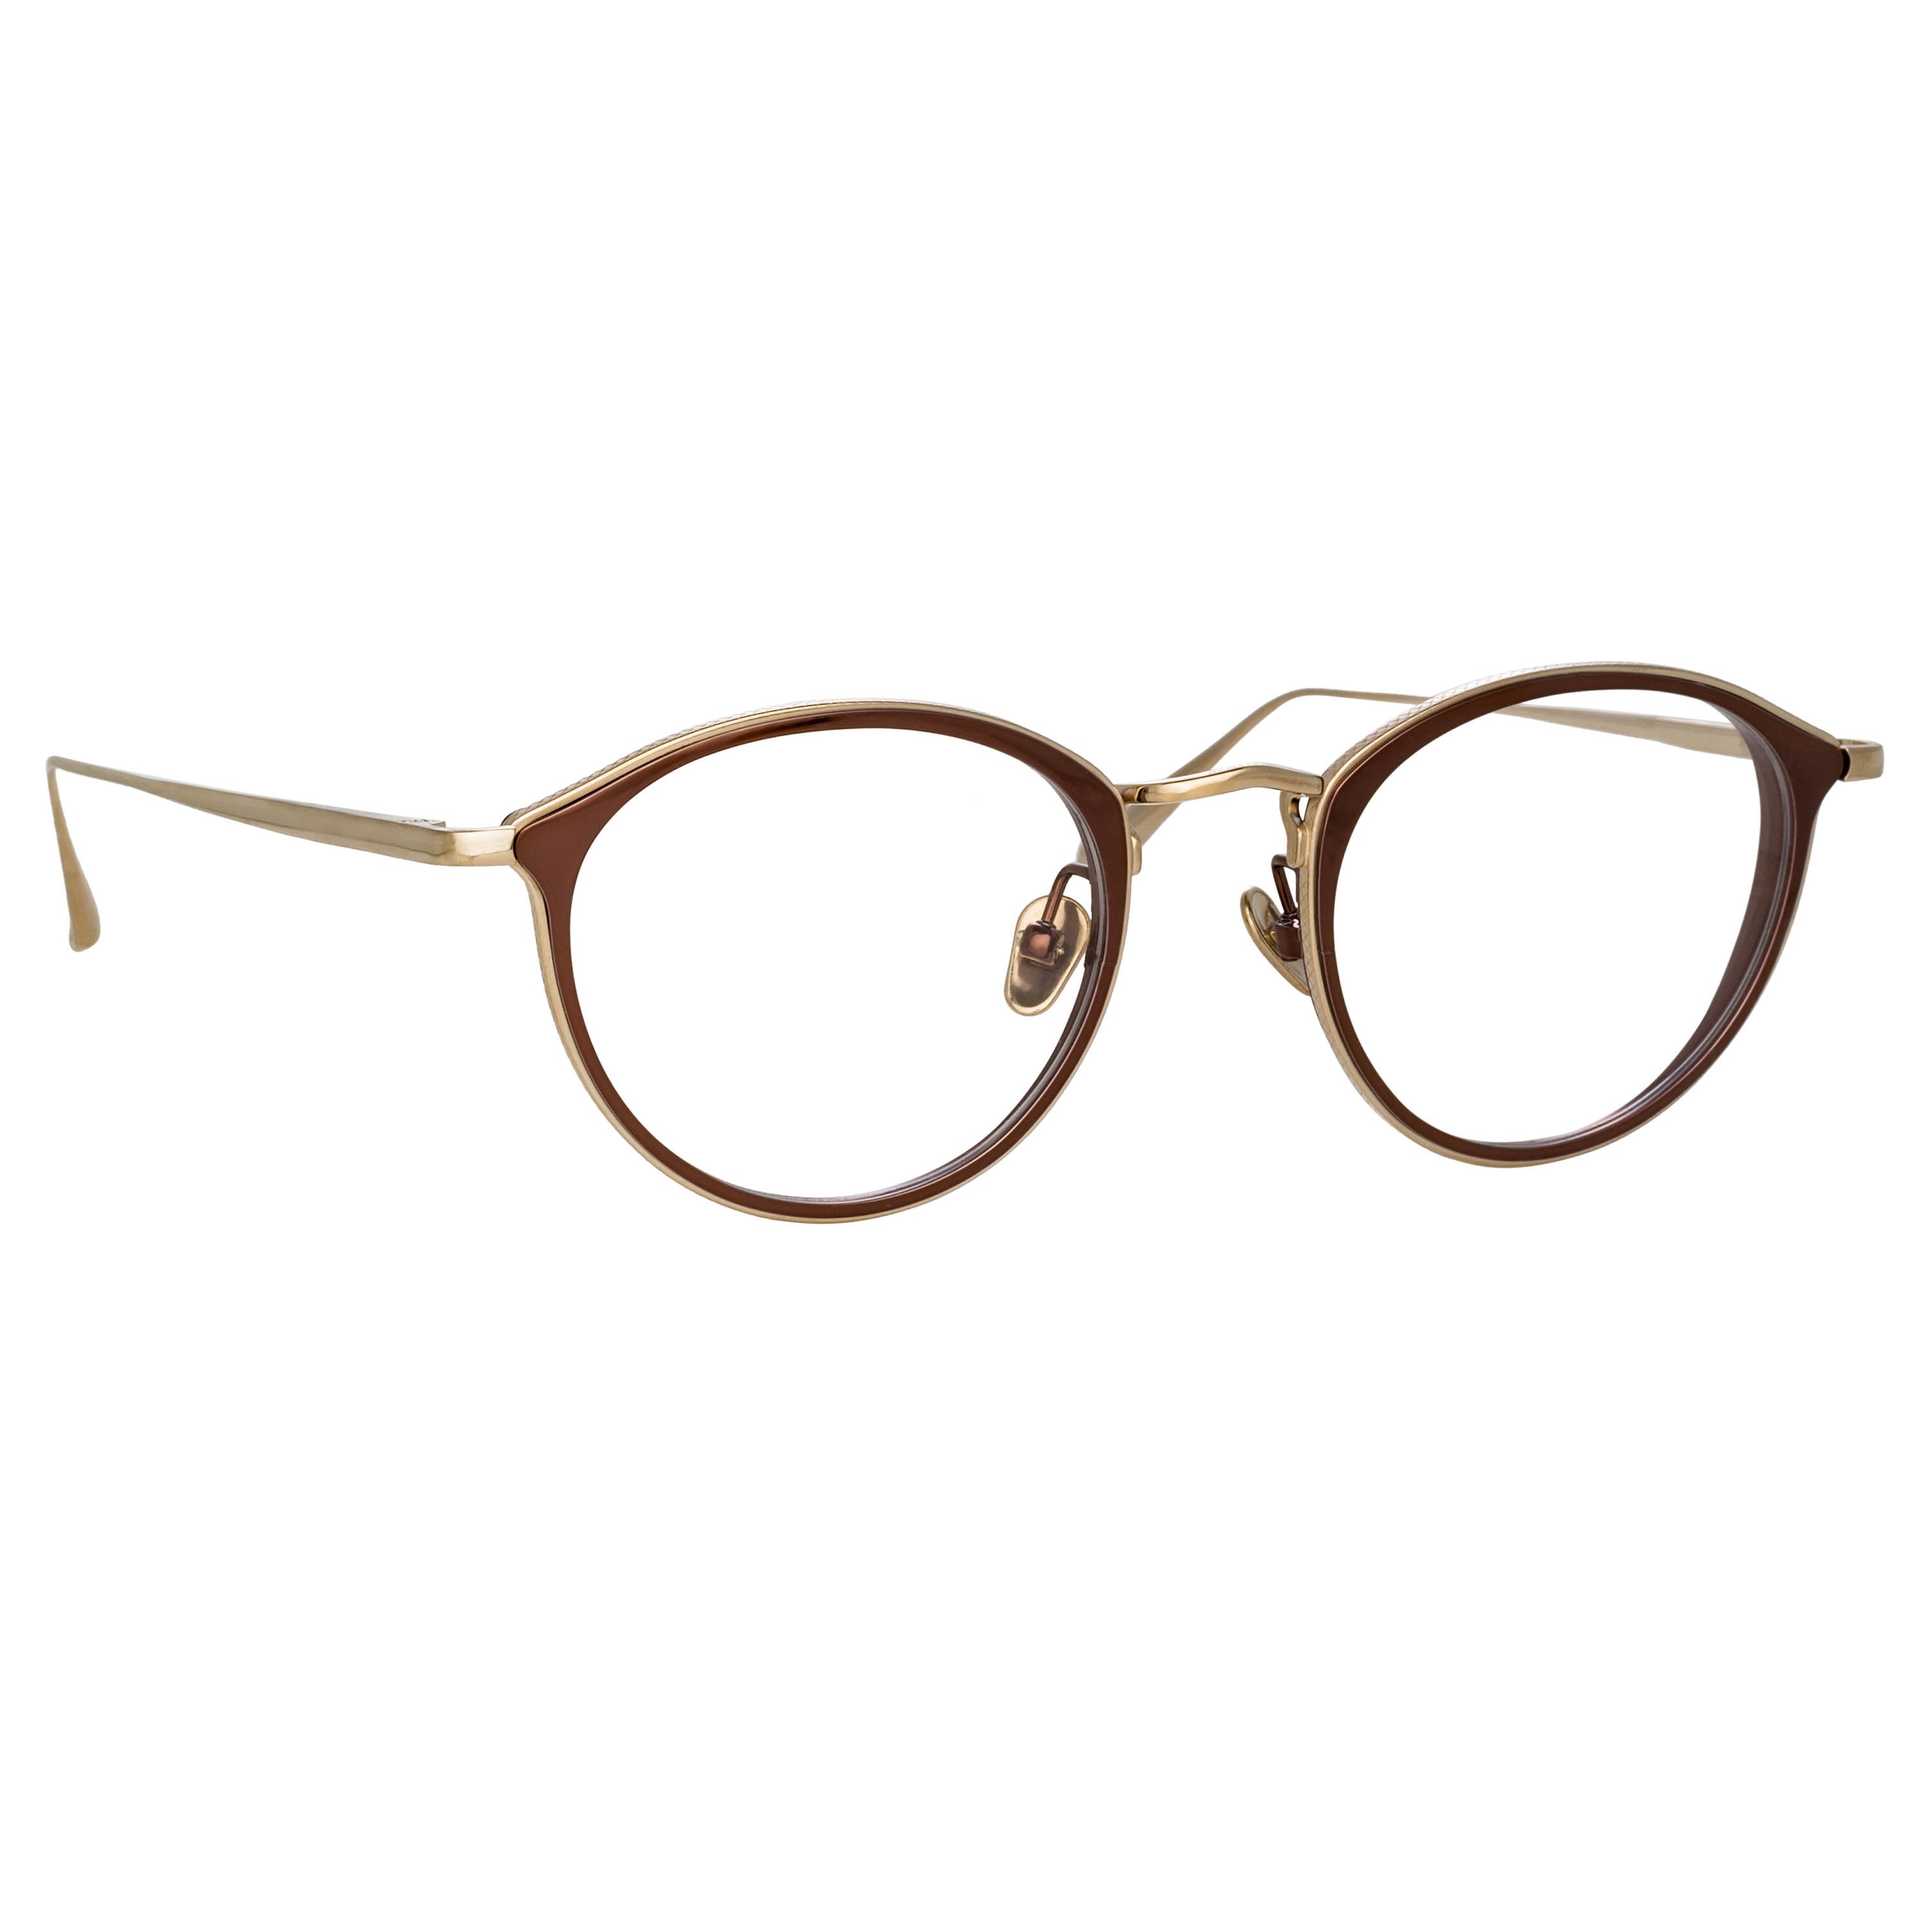 LUIS OVAL OPTICAL FRAME IN LIGHT GOLD AND BROWN - 2